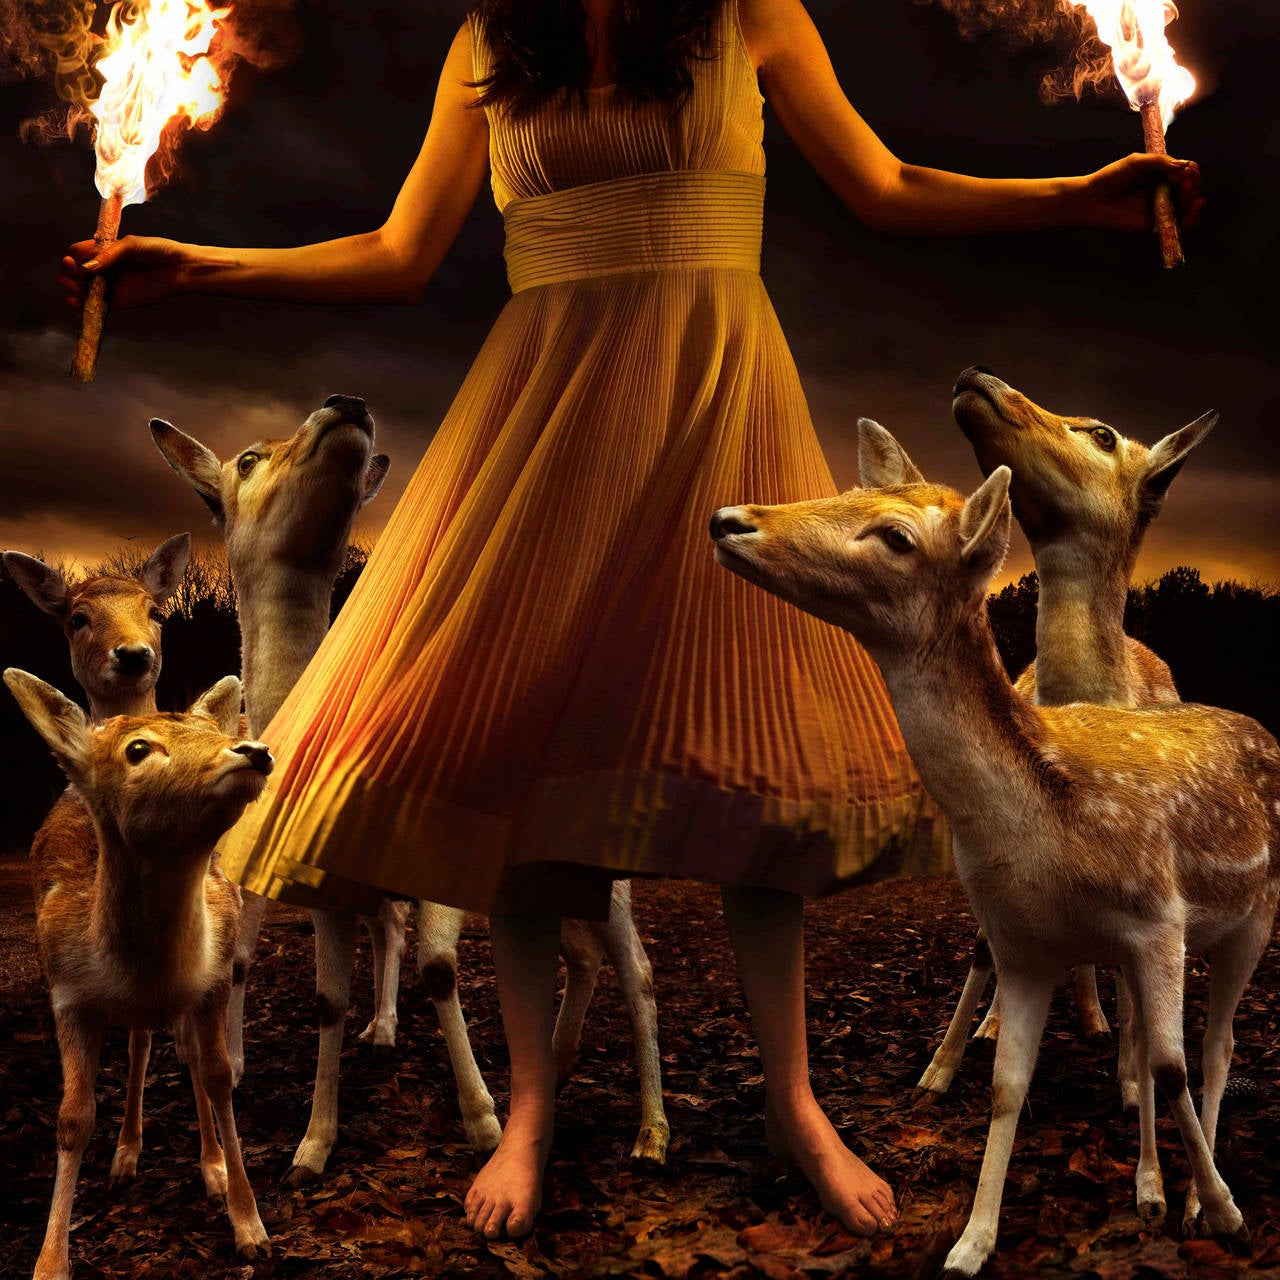 Tom Chambers Color Photograph - Burn to Shine, limited edition photograph, archival pigment, signed and numbered